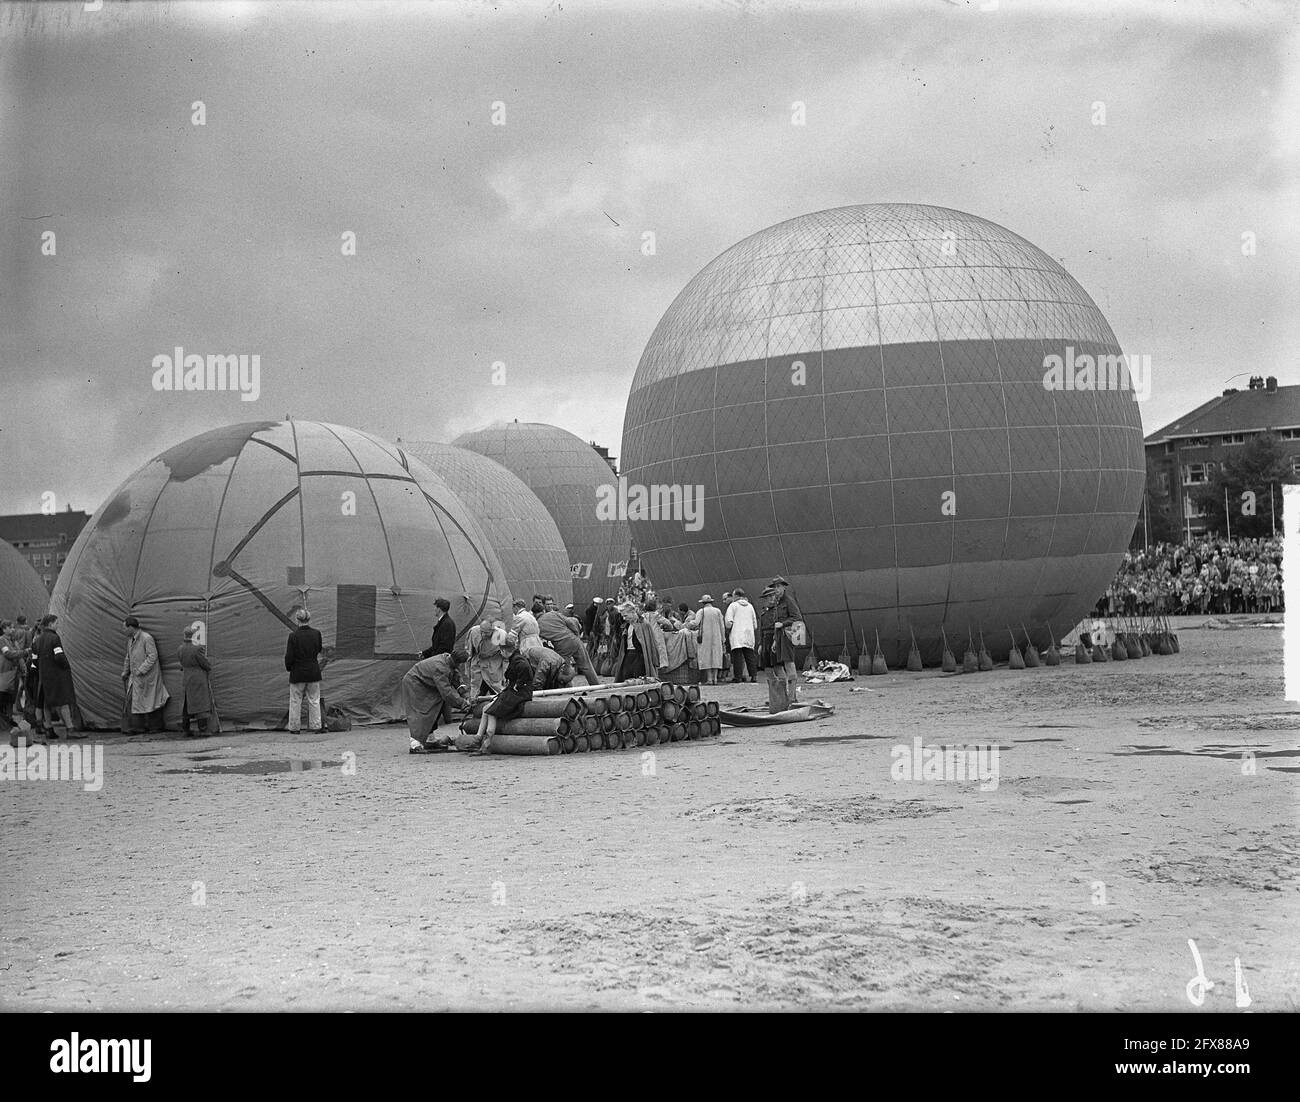 Balloon race Amsterdam filling with cylinders, September 2, 1950, Balloon races, The Netherlands, 20th century press agency photo, news to remember, documentary, historic photography 1945-1990, visual stories, human history of the Twentieth Century, capturing moments in time Stock Photo